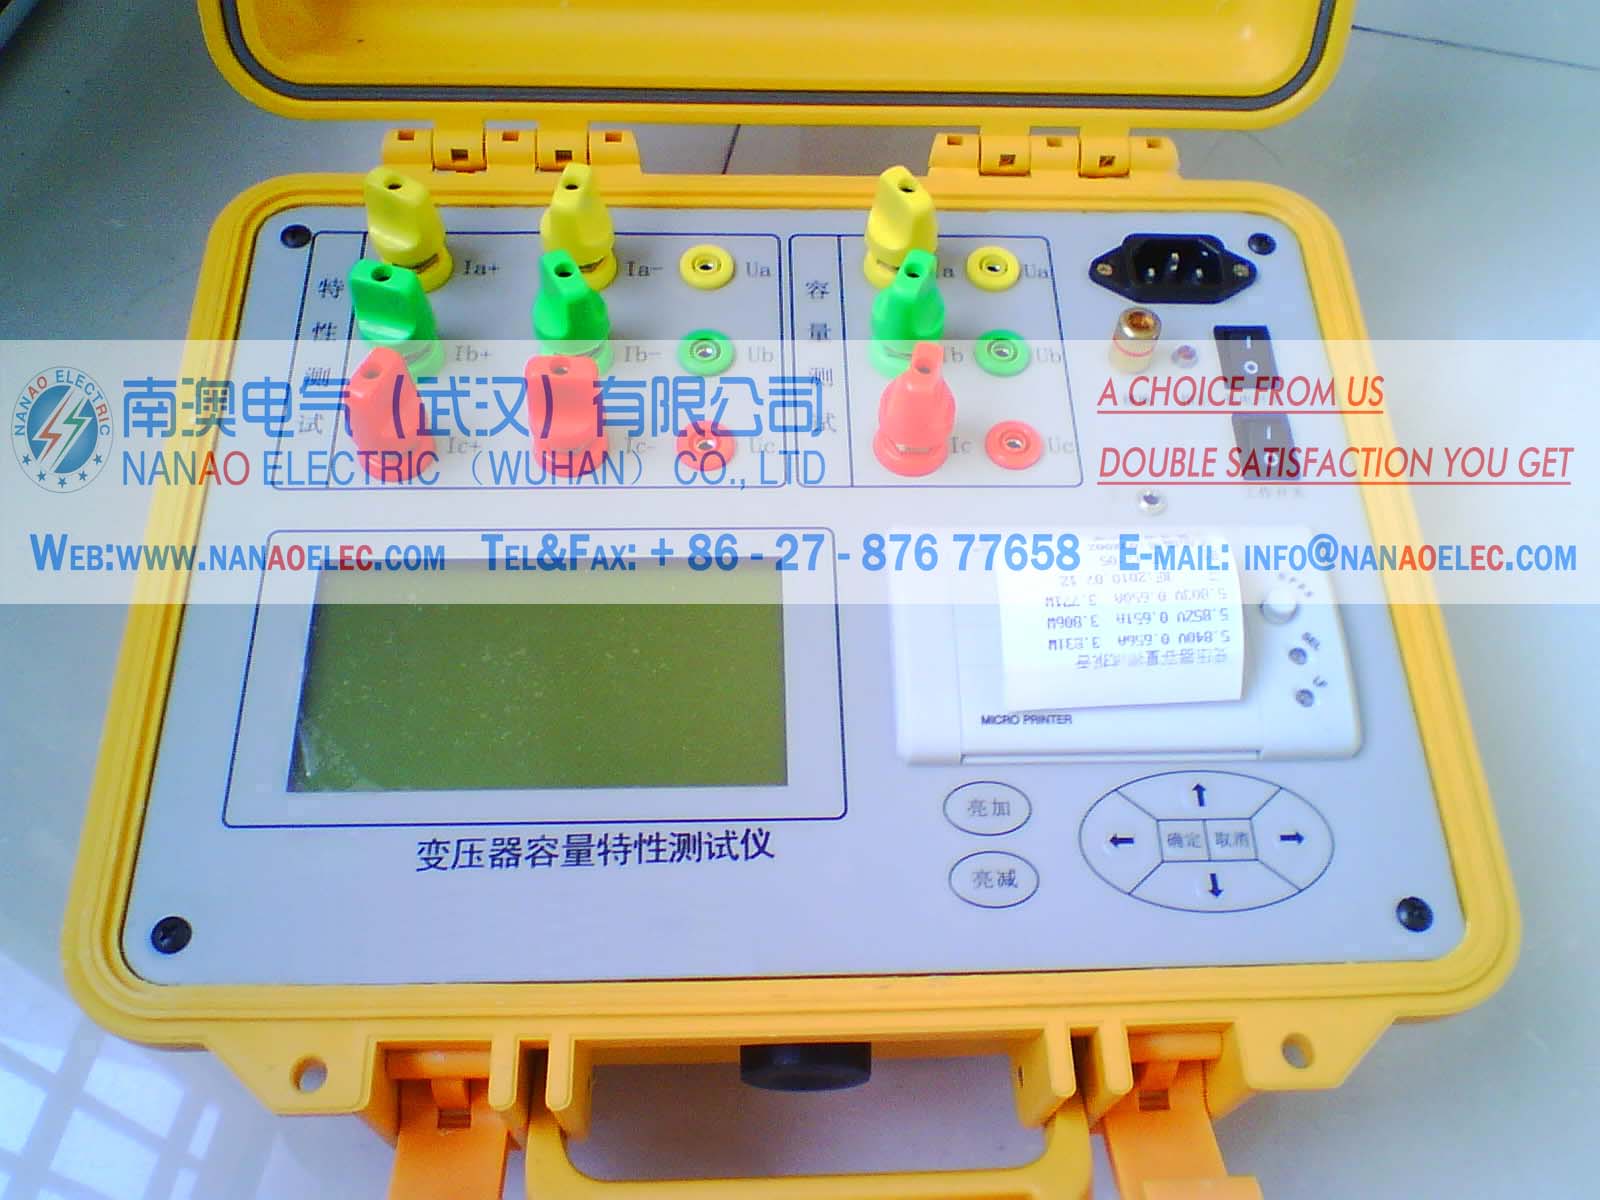 NABCD Intelligent electrical parameters measuring tester